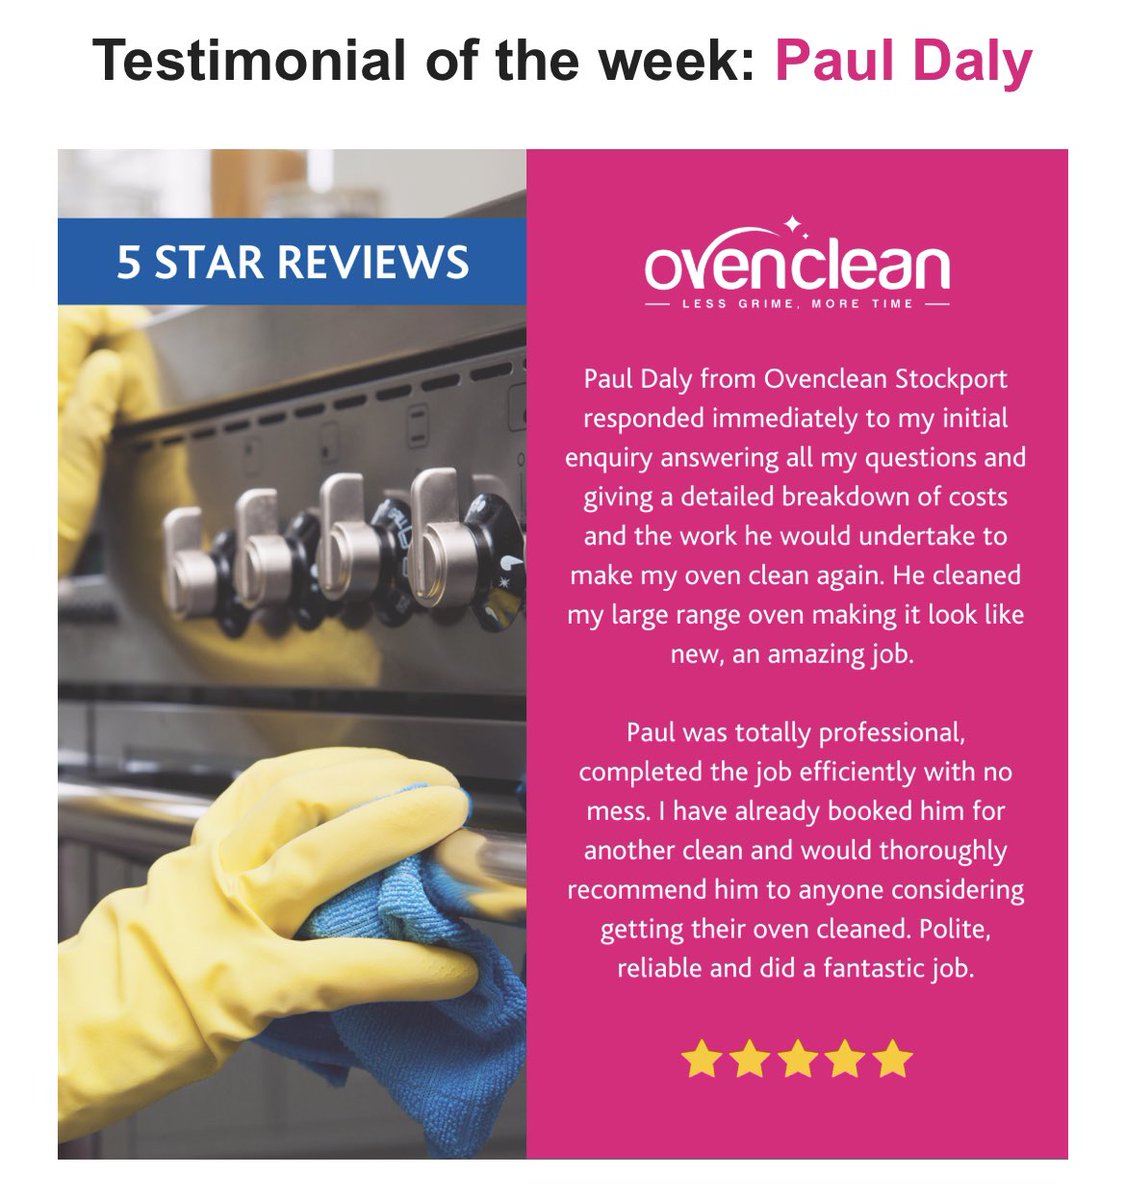 Pleased to have received ‘Testimonial of the week’ in the Ovenclean Head Office weekly newsletter 😀✨👌😃 #ovencleanstockport #stockport #stockportbusiness #promotestockport #ovencleaner